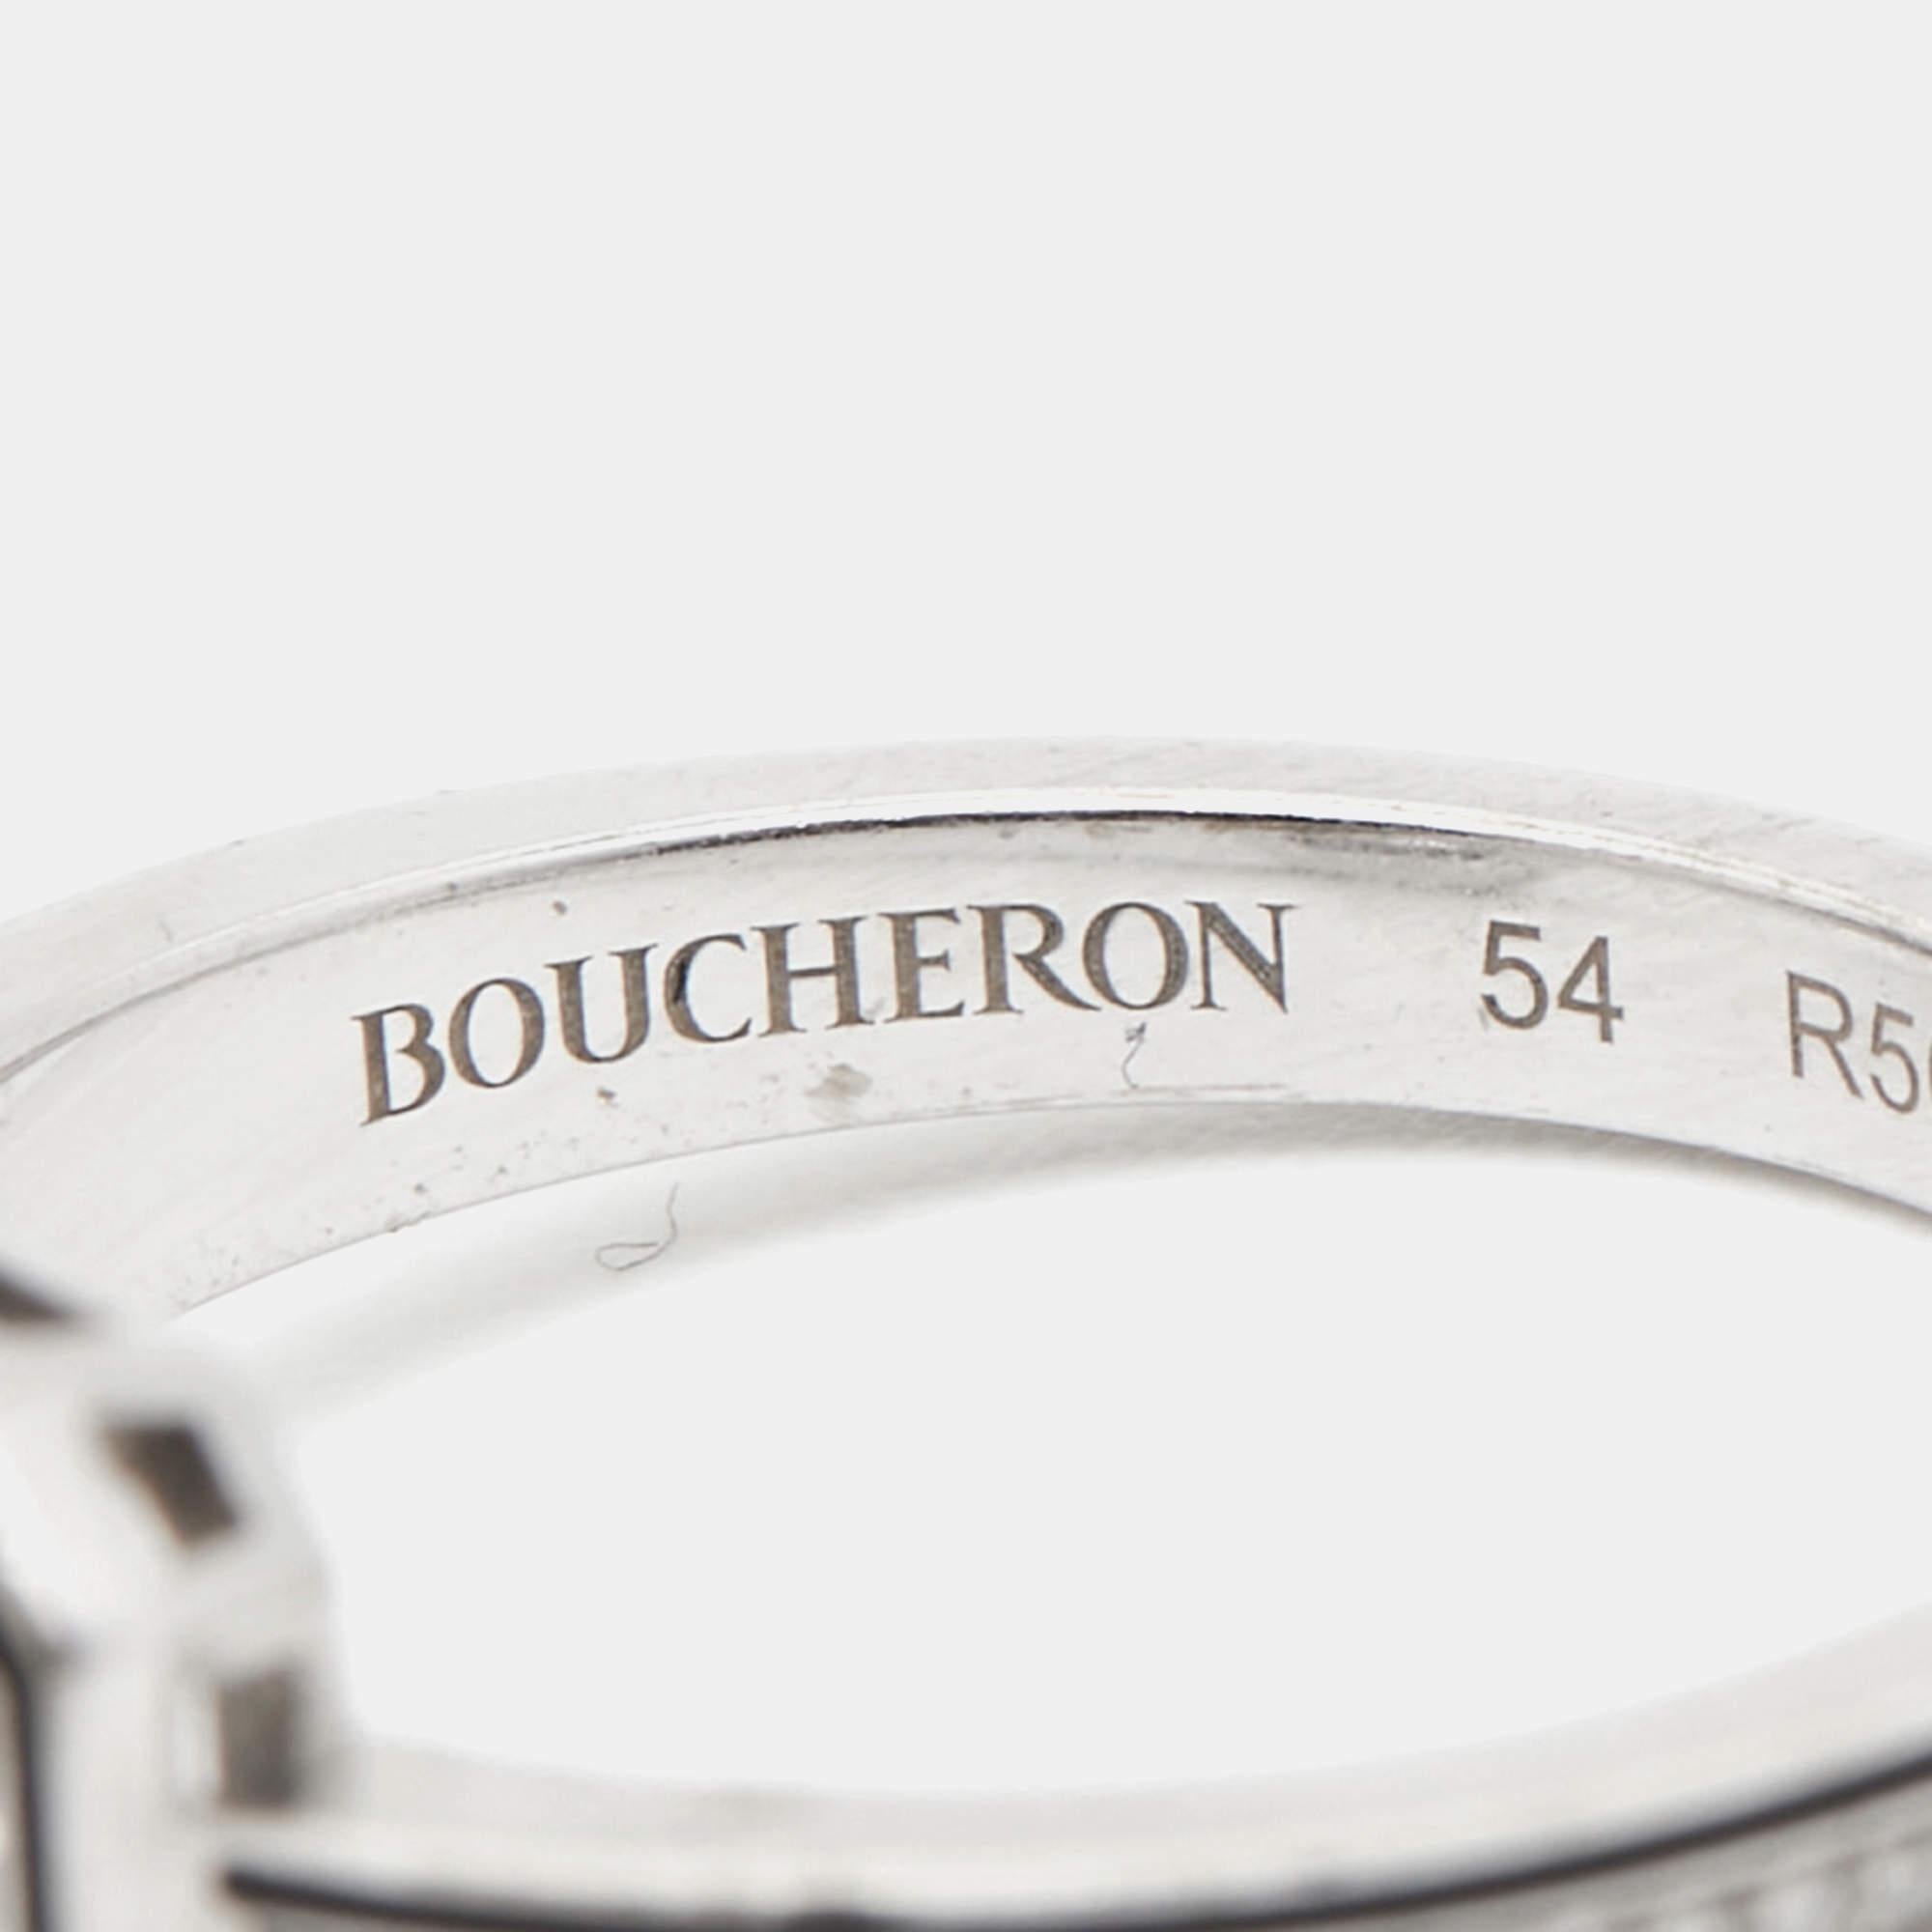 Framed with the iconic Place Vendôme silhouette when viewed from above, the Boucheron Vendôme liseré brings desirability and glittering gemstones with the endurance of Parisian elegance. This Boucheron ring is made of 18k white gold and has touches